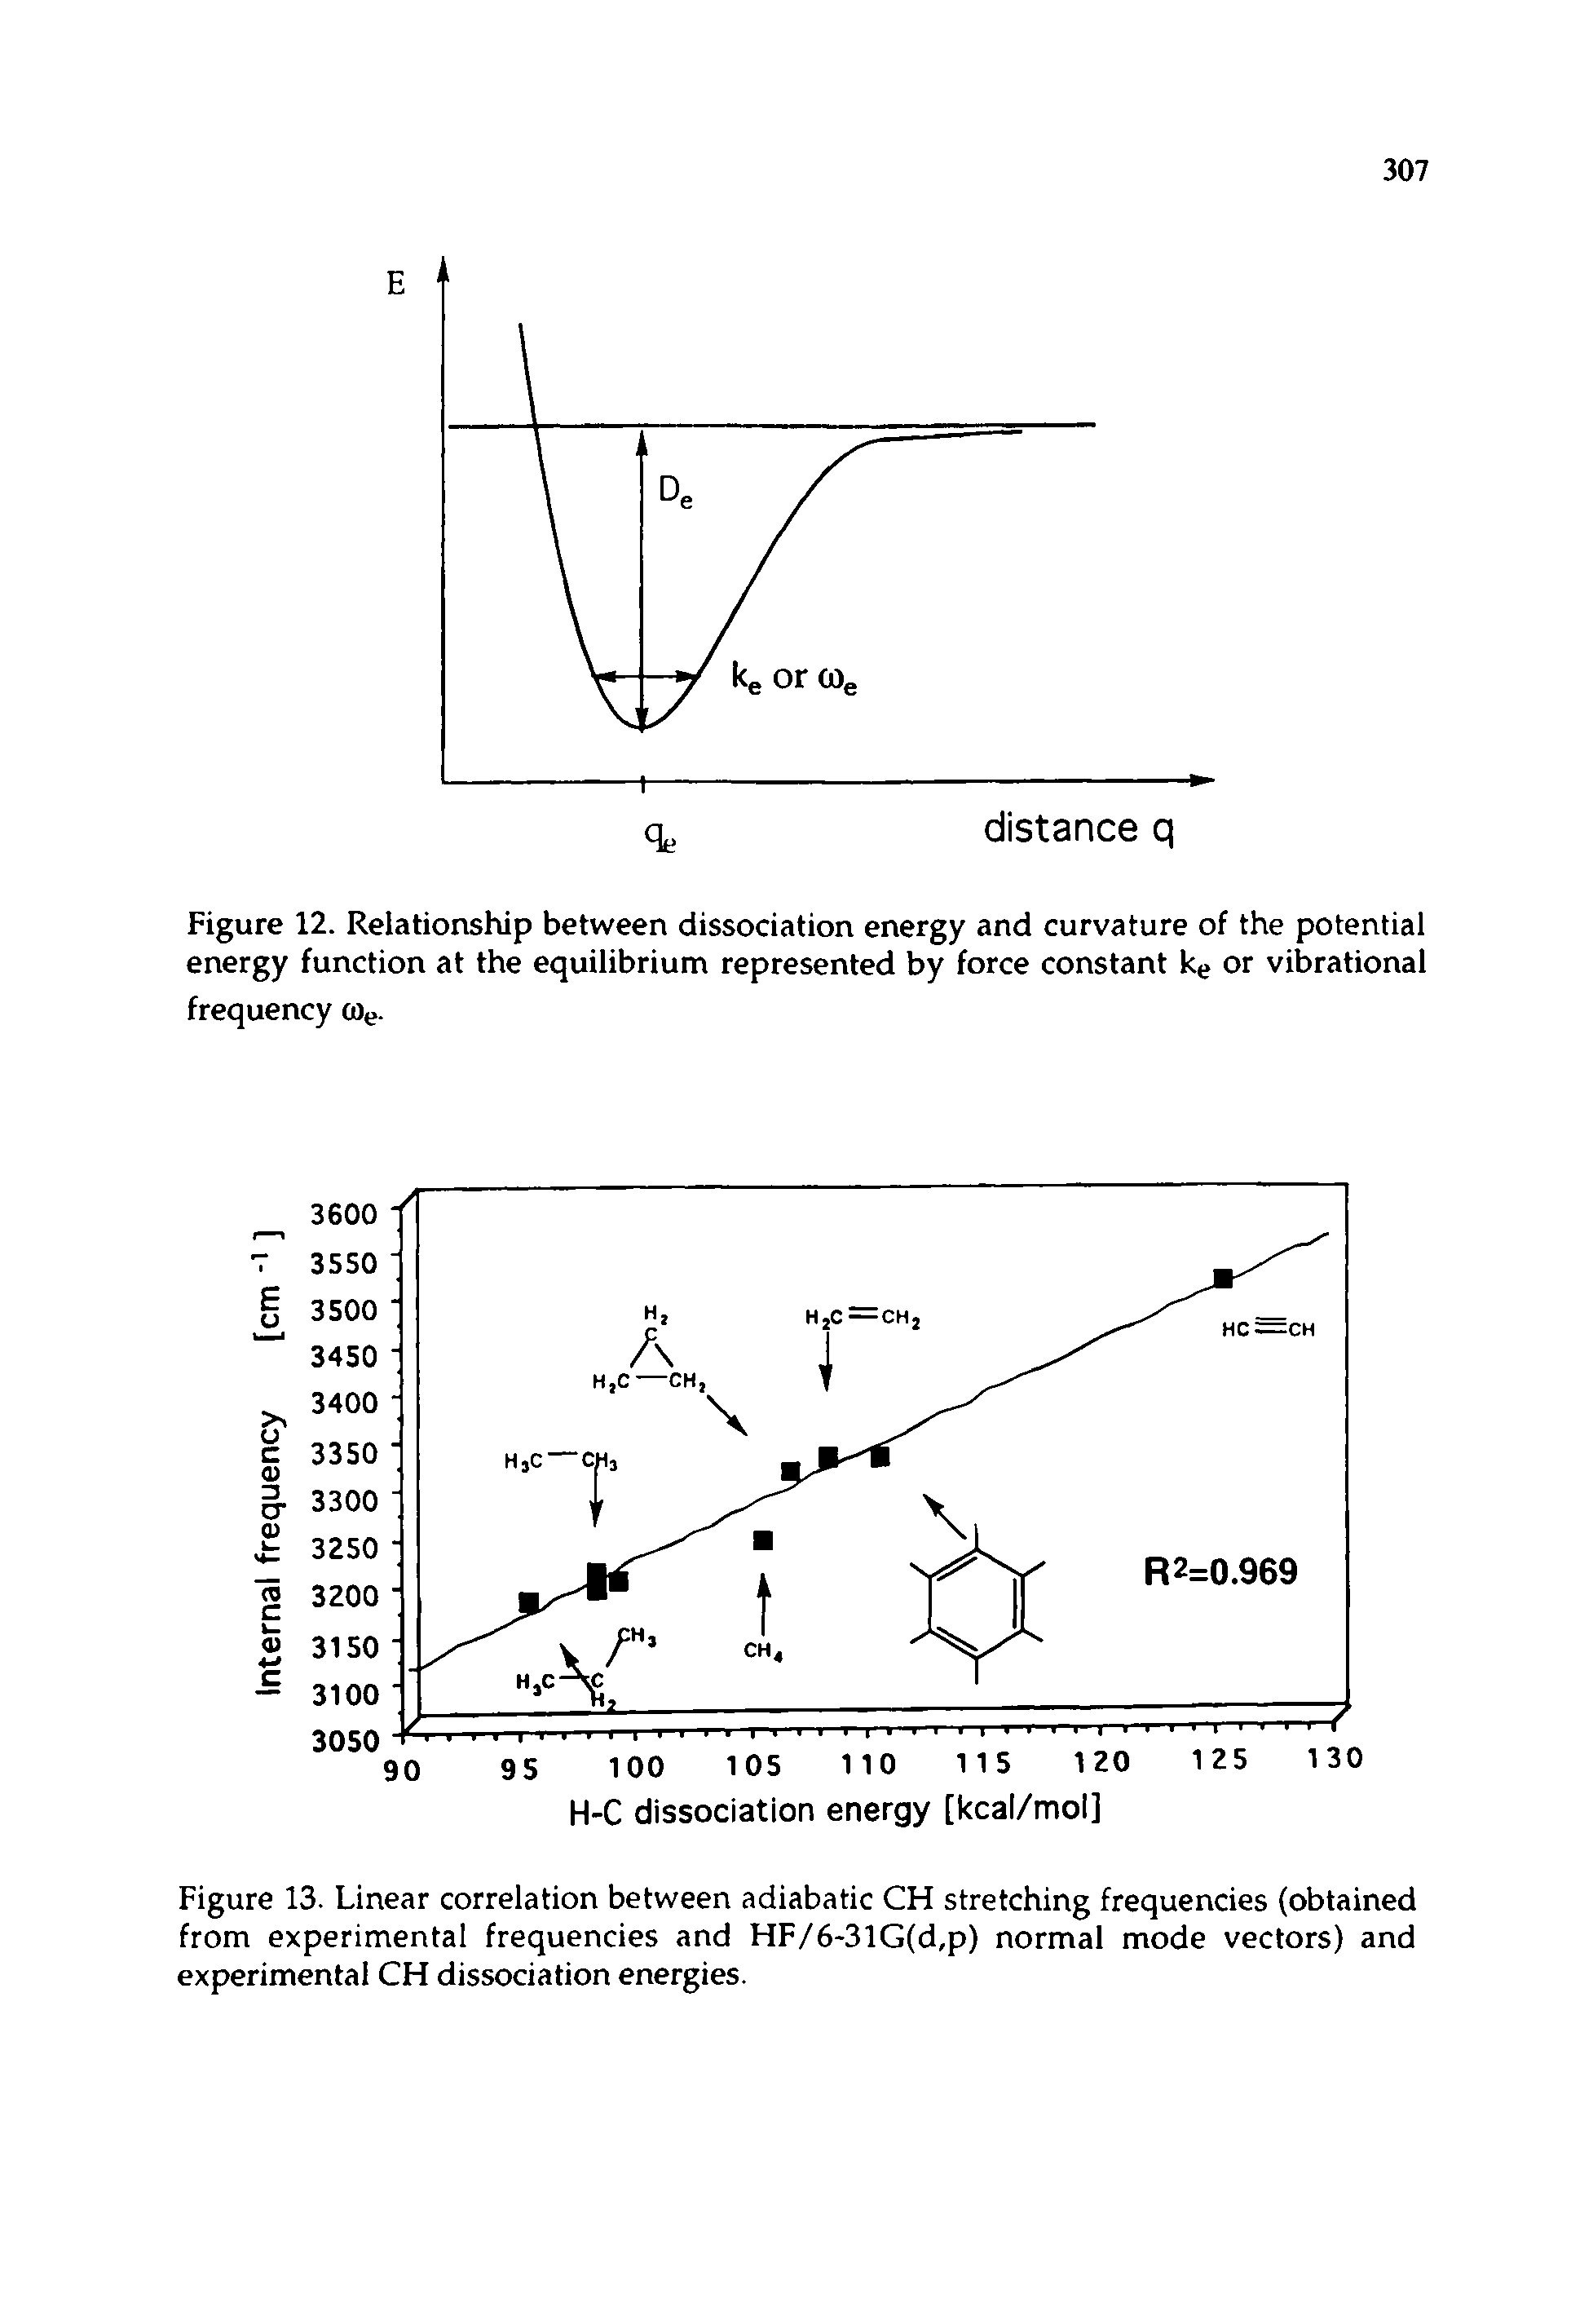 Figure 12. Relationship between dissociation energy and curvature of the potential energy function at the equilibrium represented by force constant ke or vibrational frequency cOe.